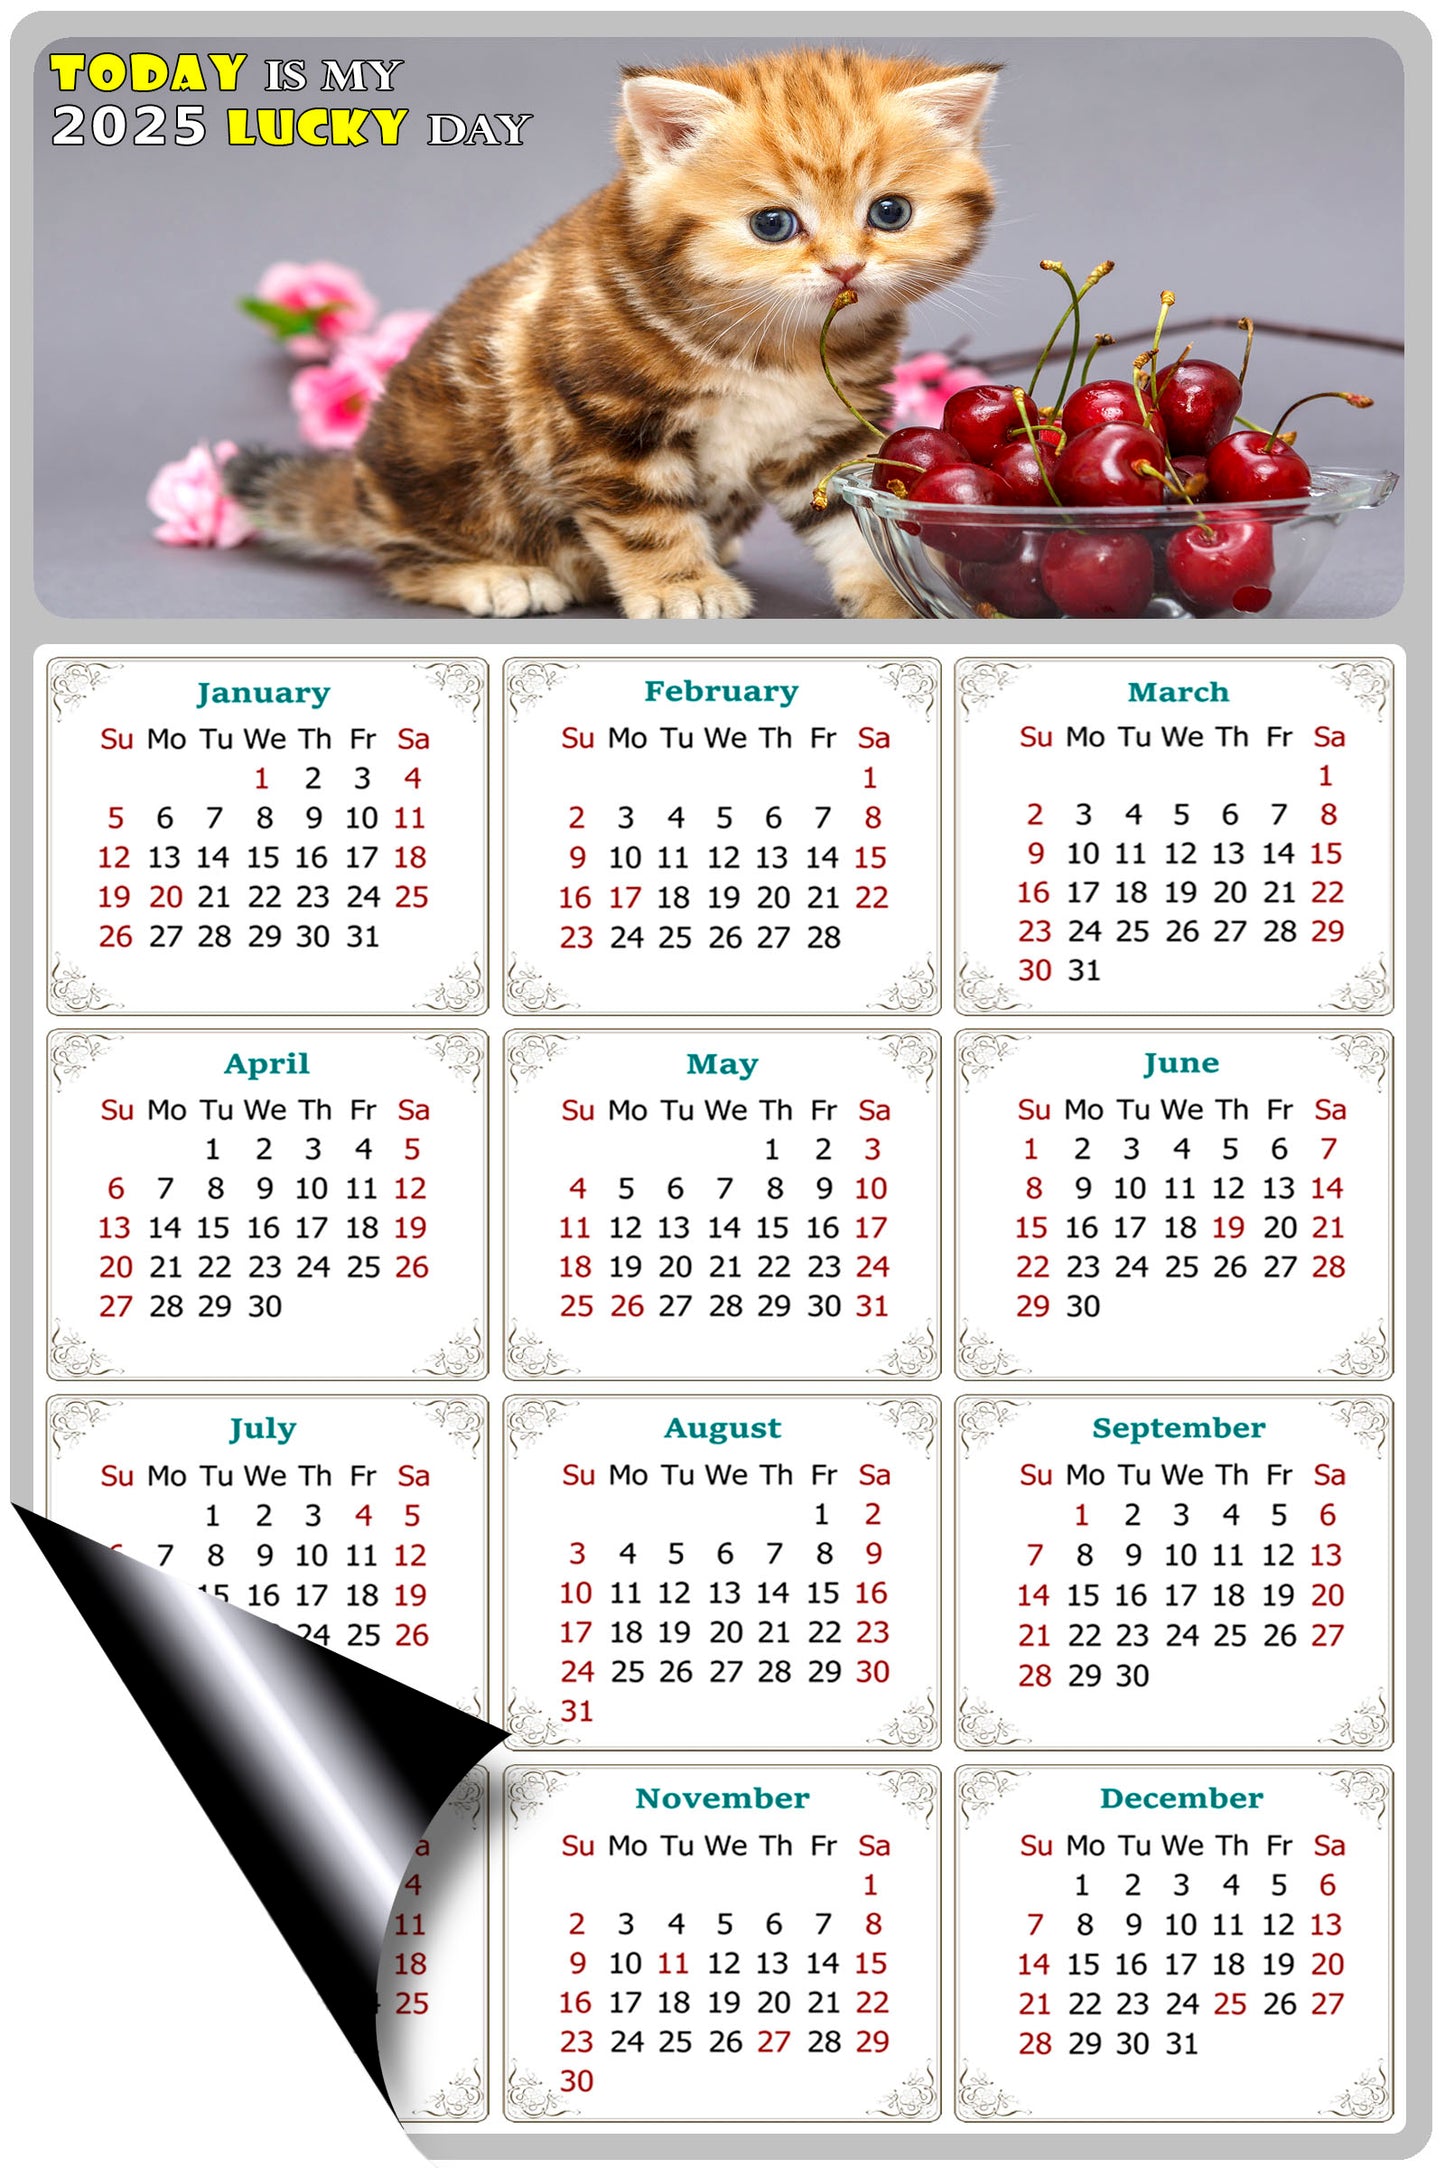 2025 Magnetic Calendar - Today is My Lucky Day (Fade, Tear, and Water Resistant)- Cat Themed 016